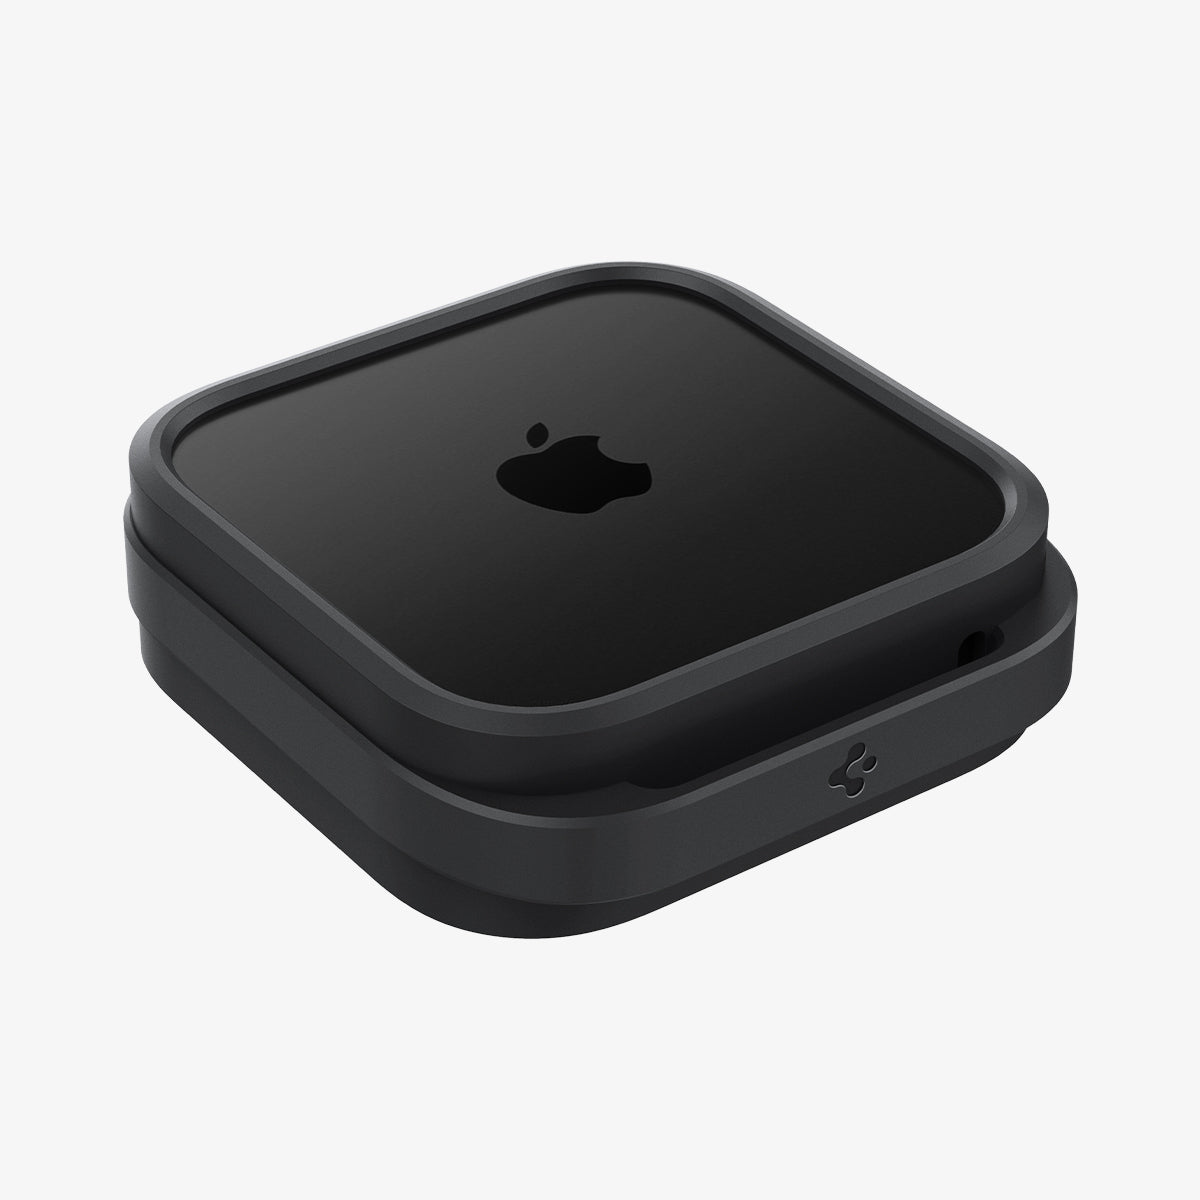 AMP05858 - Apple TV 4K (3rd Gen) Mount Silicone Fit in black showing the front, top and side